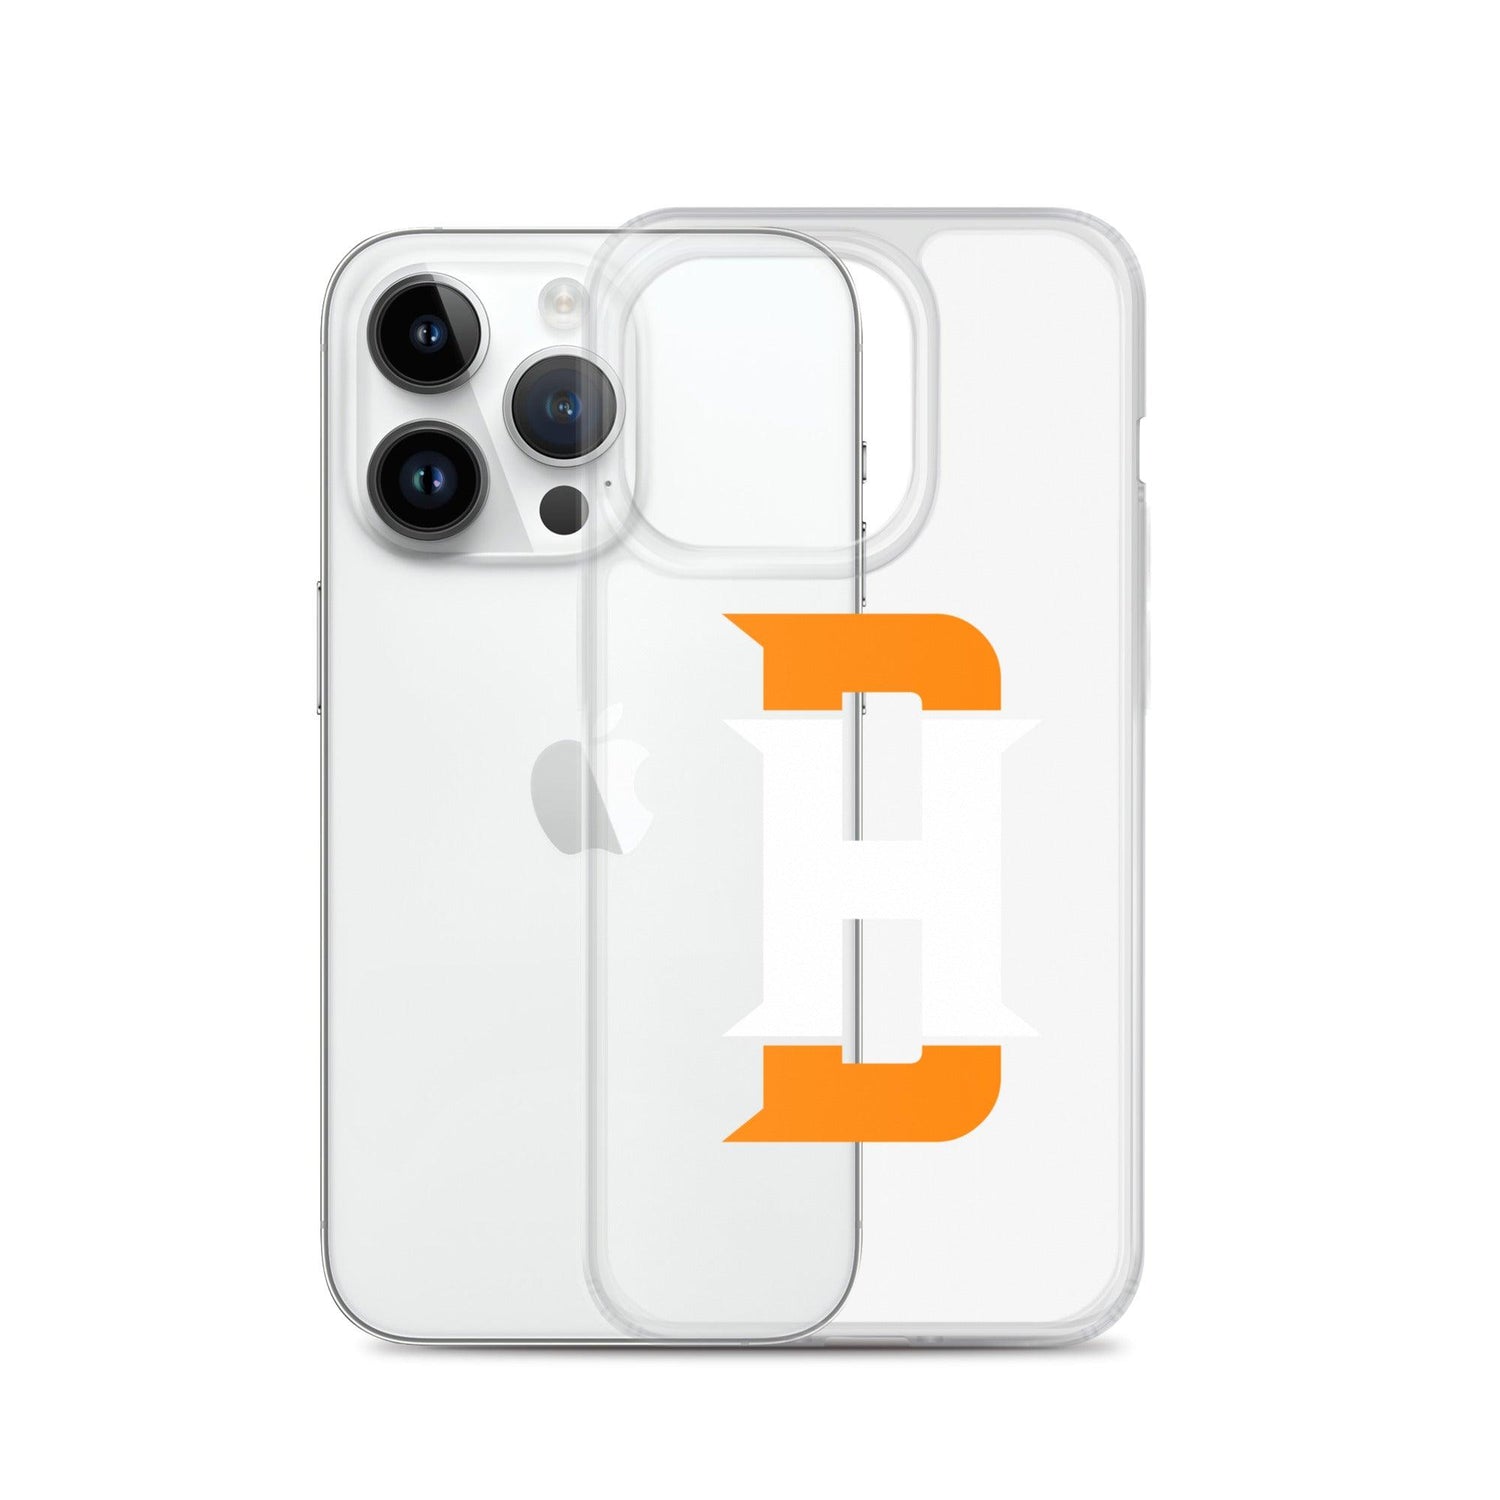 Daevin Hobbs "Essential" iPhone Case - Fan Arch